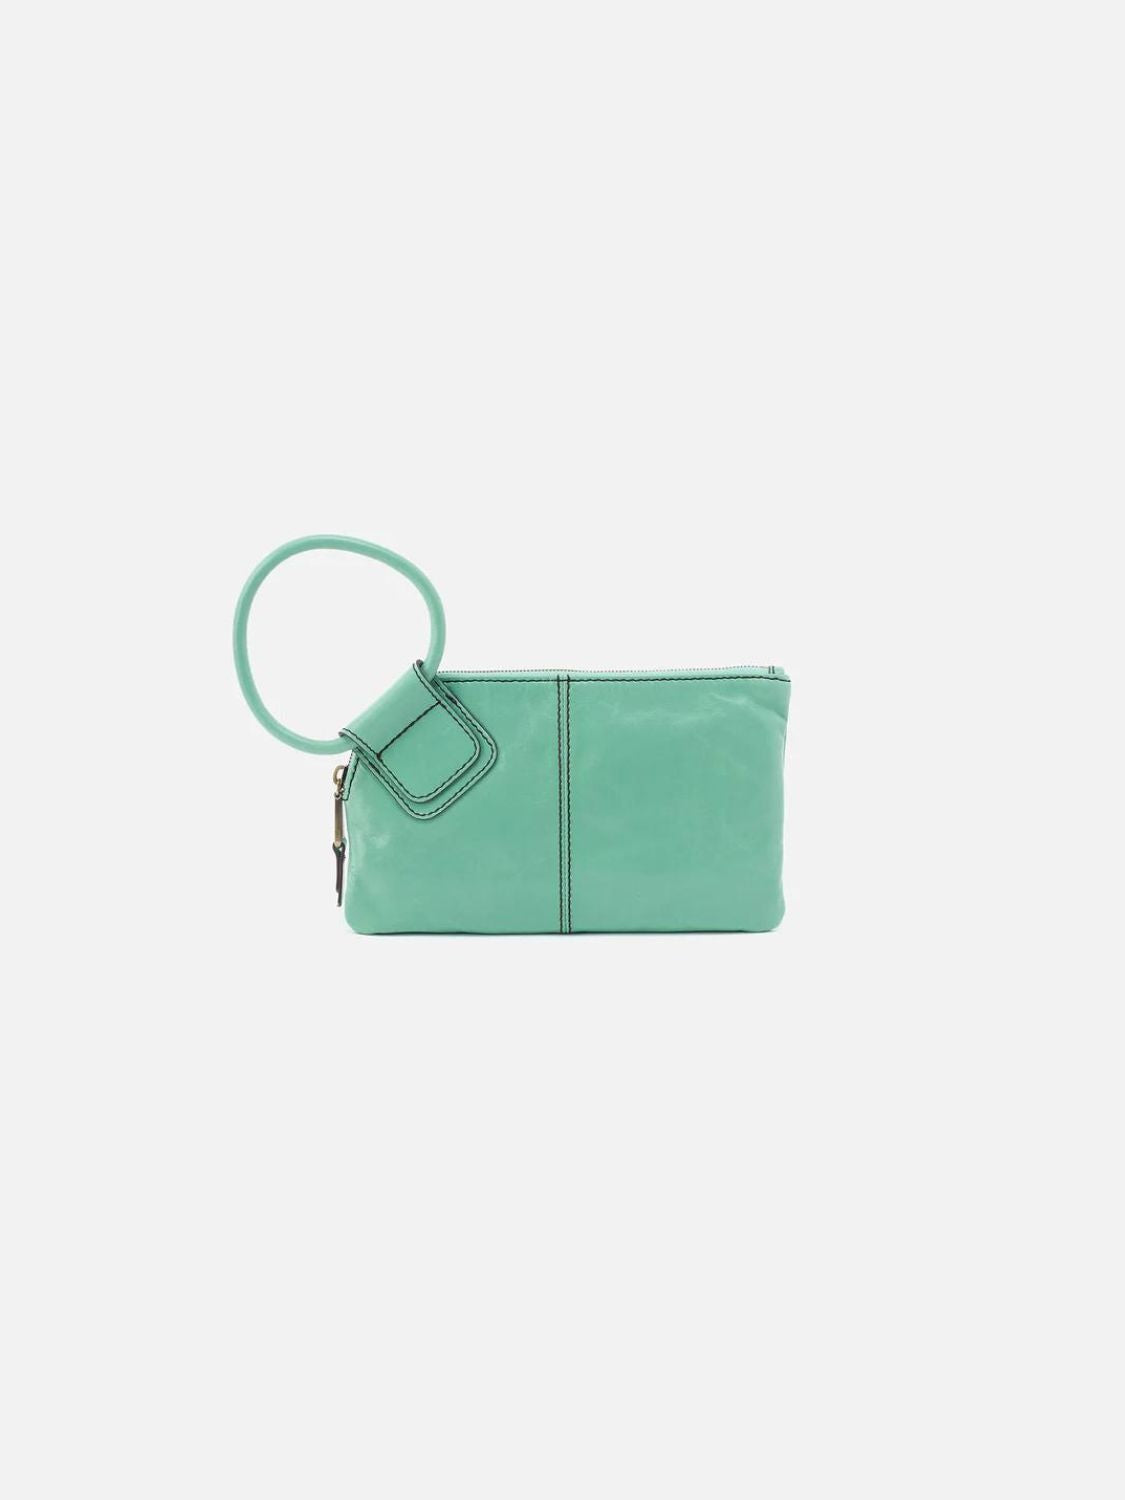 hobo sable polished leather wristlet in seaglass-front